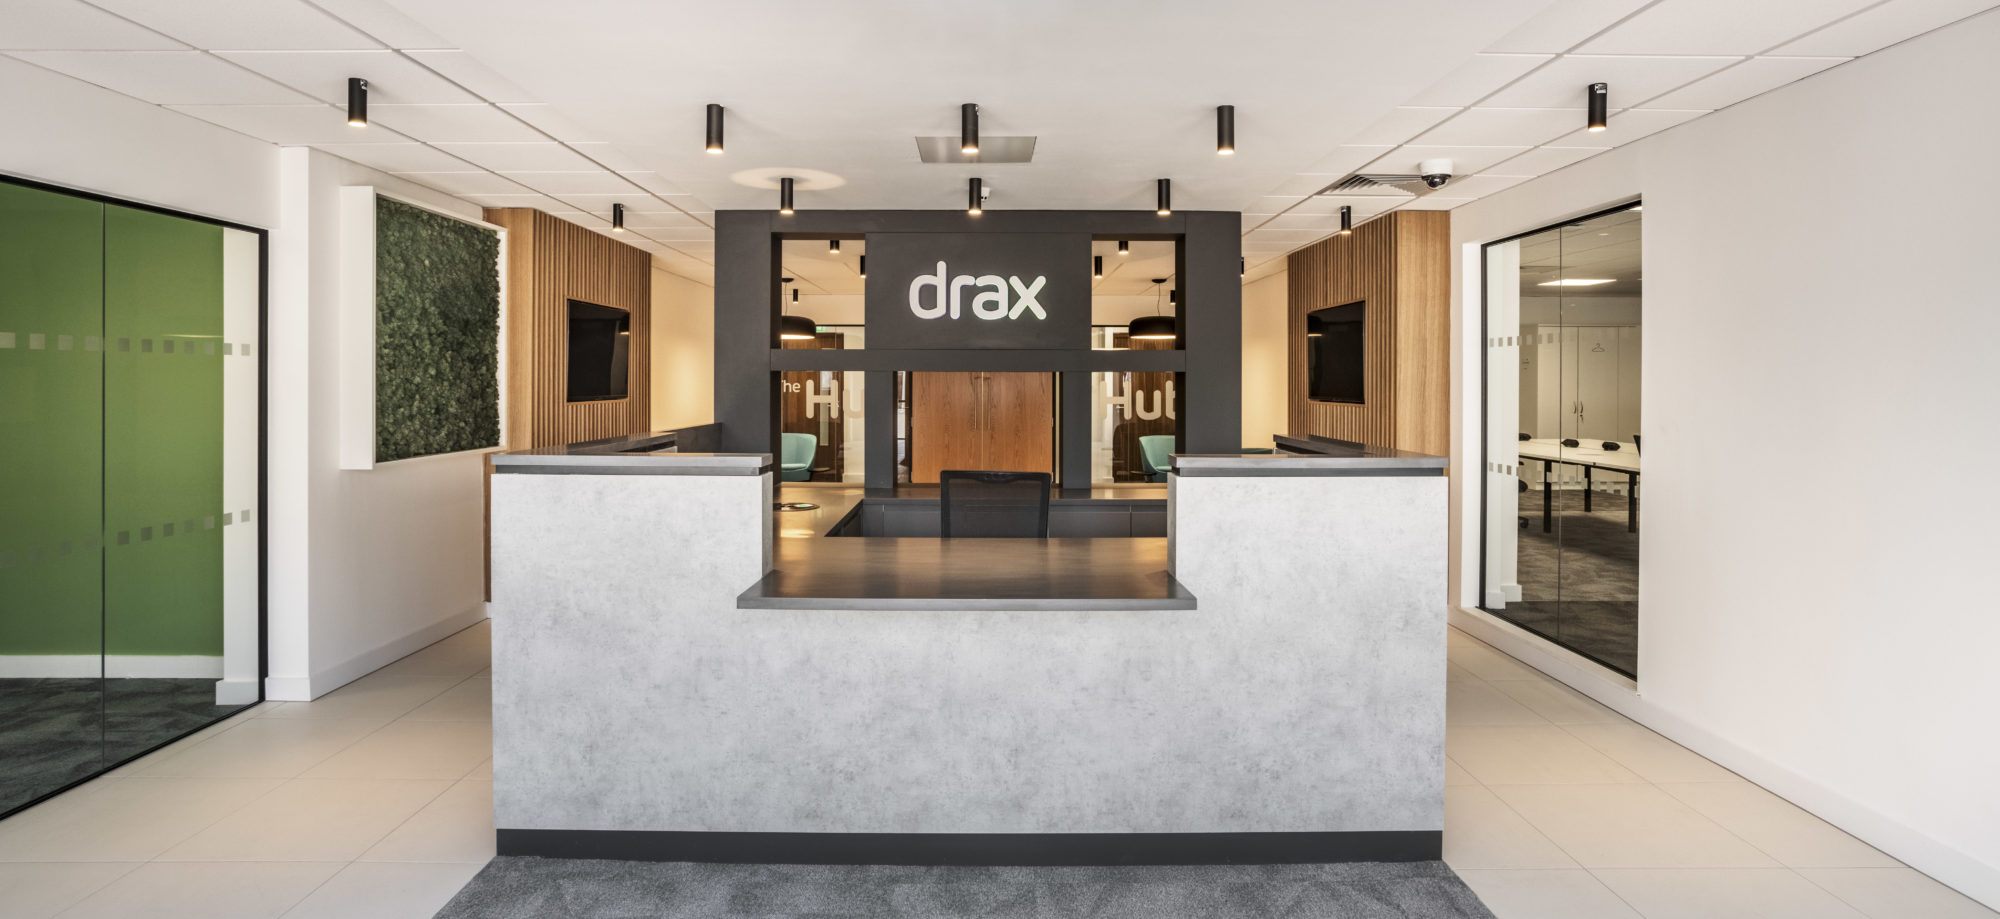 Timber panelling and biophilia in Drax reception